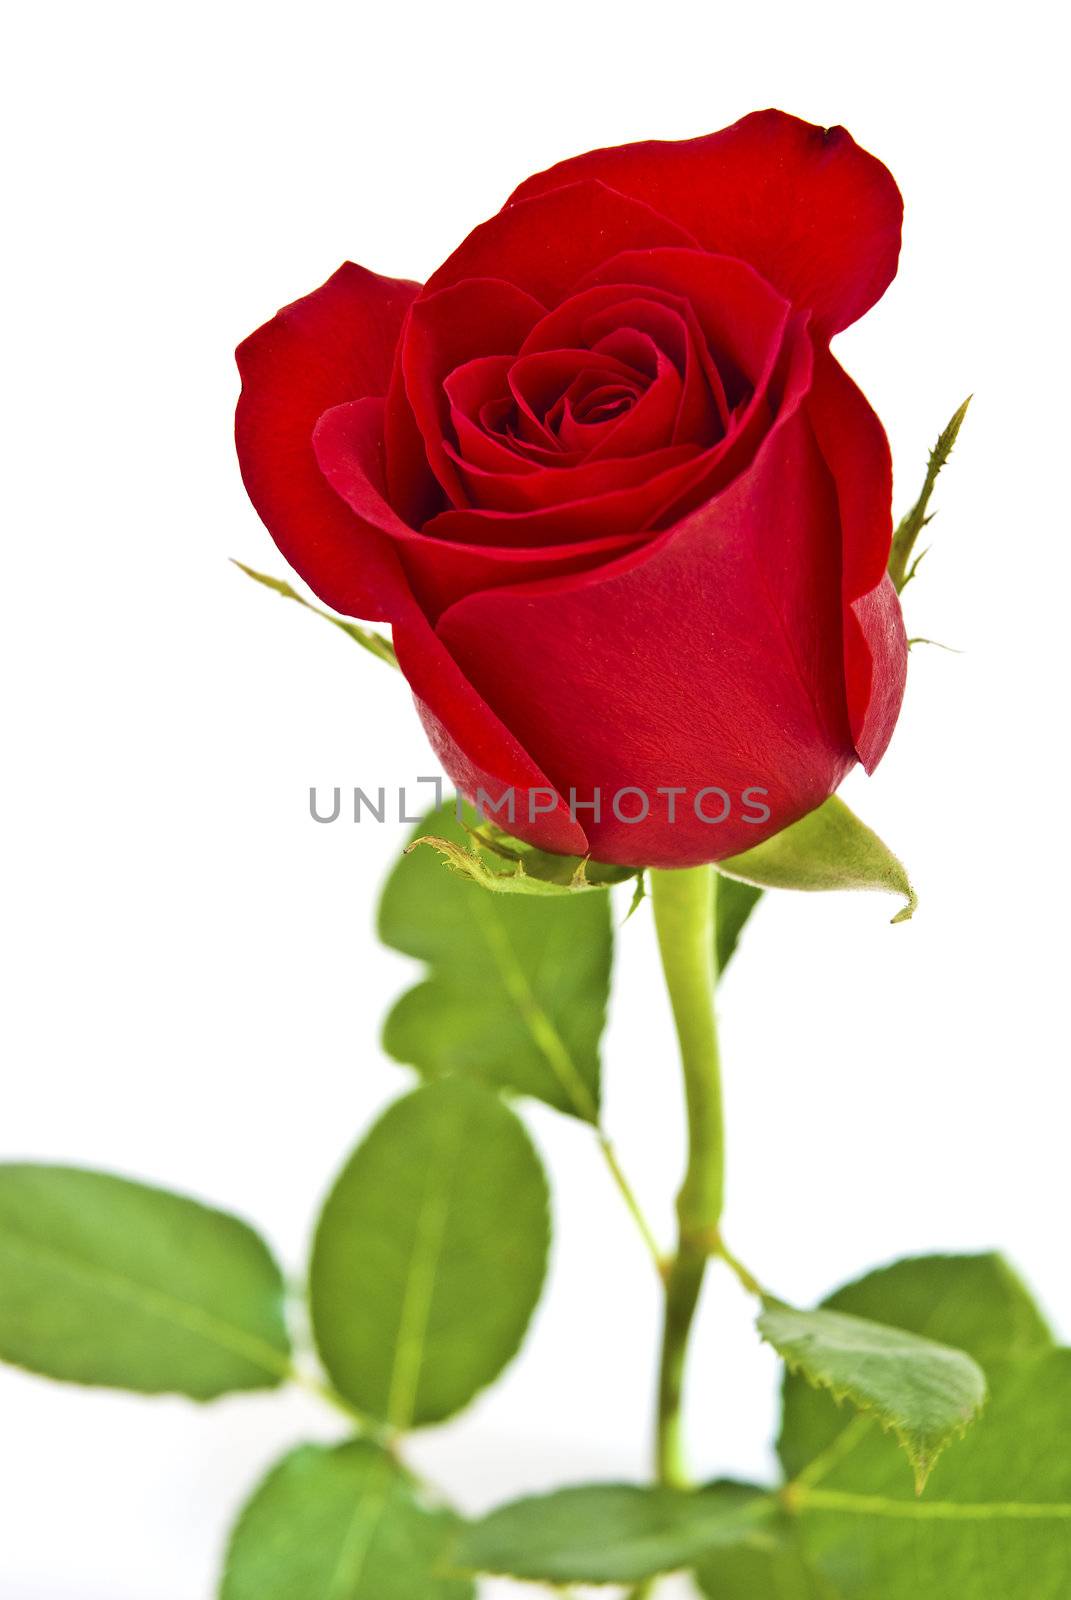 Red rose with green leaves. Isolated on white background. by mozzyb